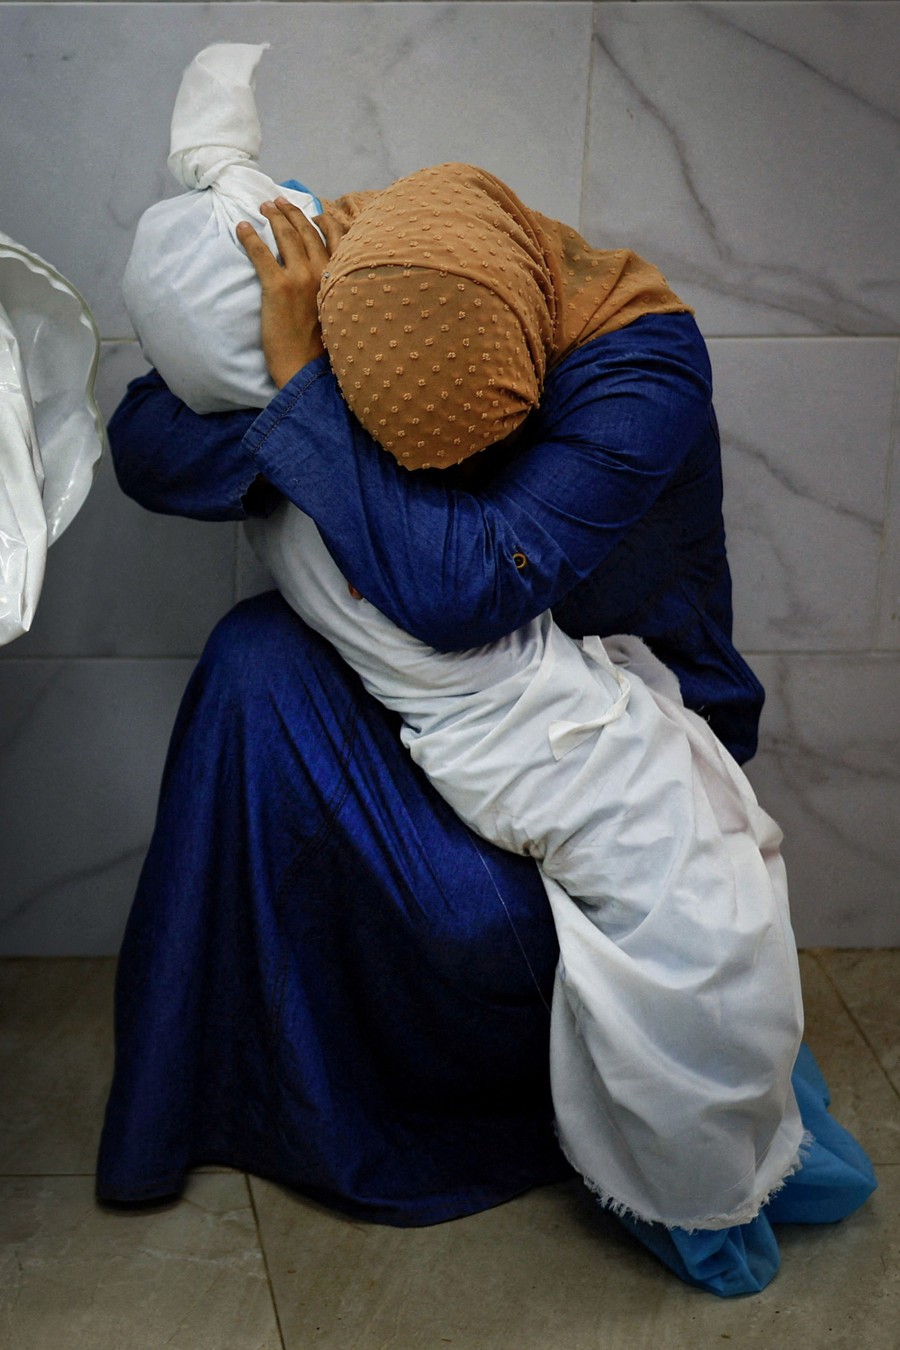 A woman kneels and puts her head down while embracing the body of a child, wrapped in white cloth.